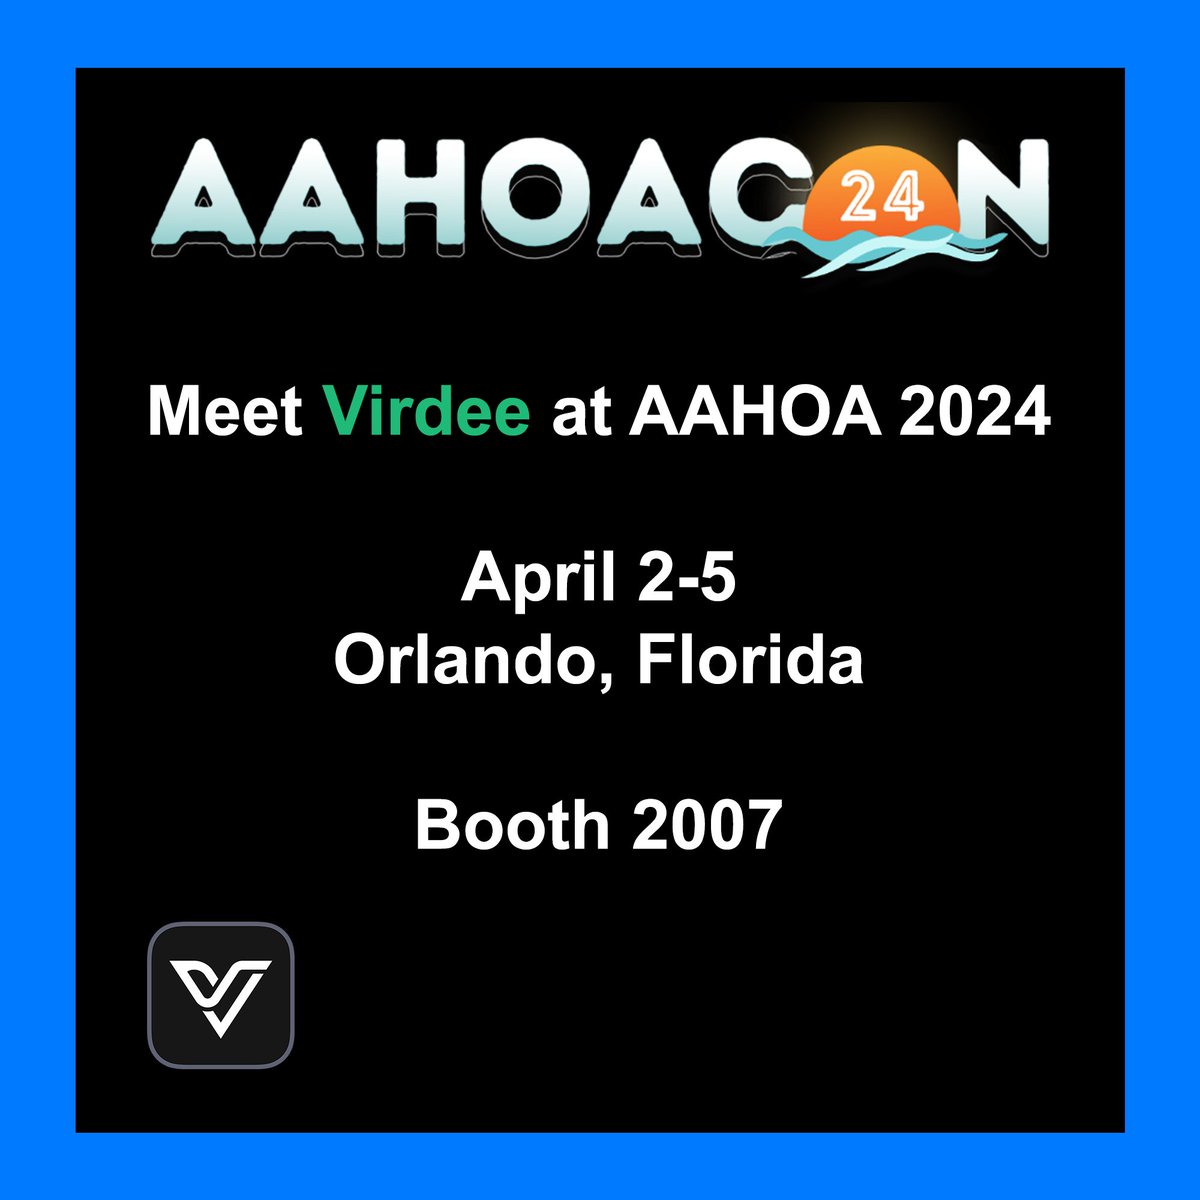 AAHOA 2024 is only a few short weeks away. Team Virdee is getting excited to show the newest updates to the Virdee Virtual Reception. 

Want to meet? Let us know: hubs.ly/Q02pby100

#aahoa #aahoacon24 #aahoacon #hospitality #guestexperience